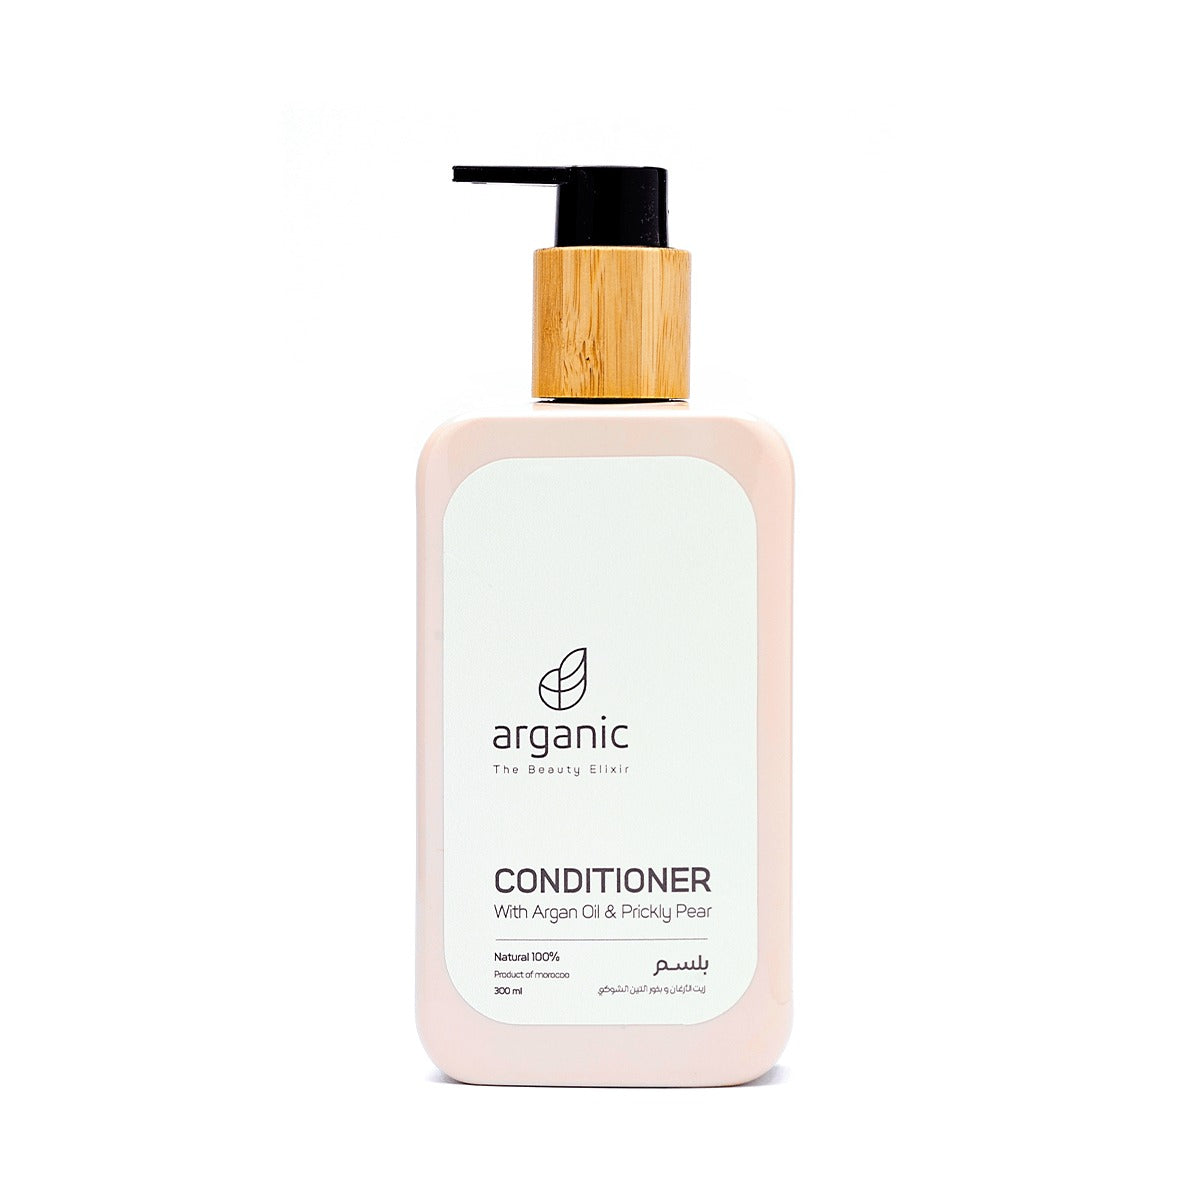 Conditioner with argan oil and prickly pear in pink bottle.